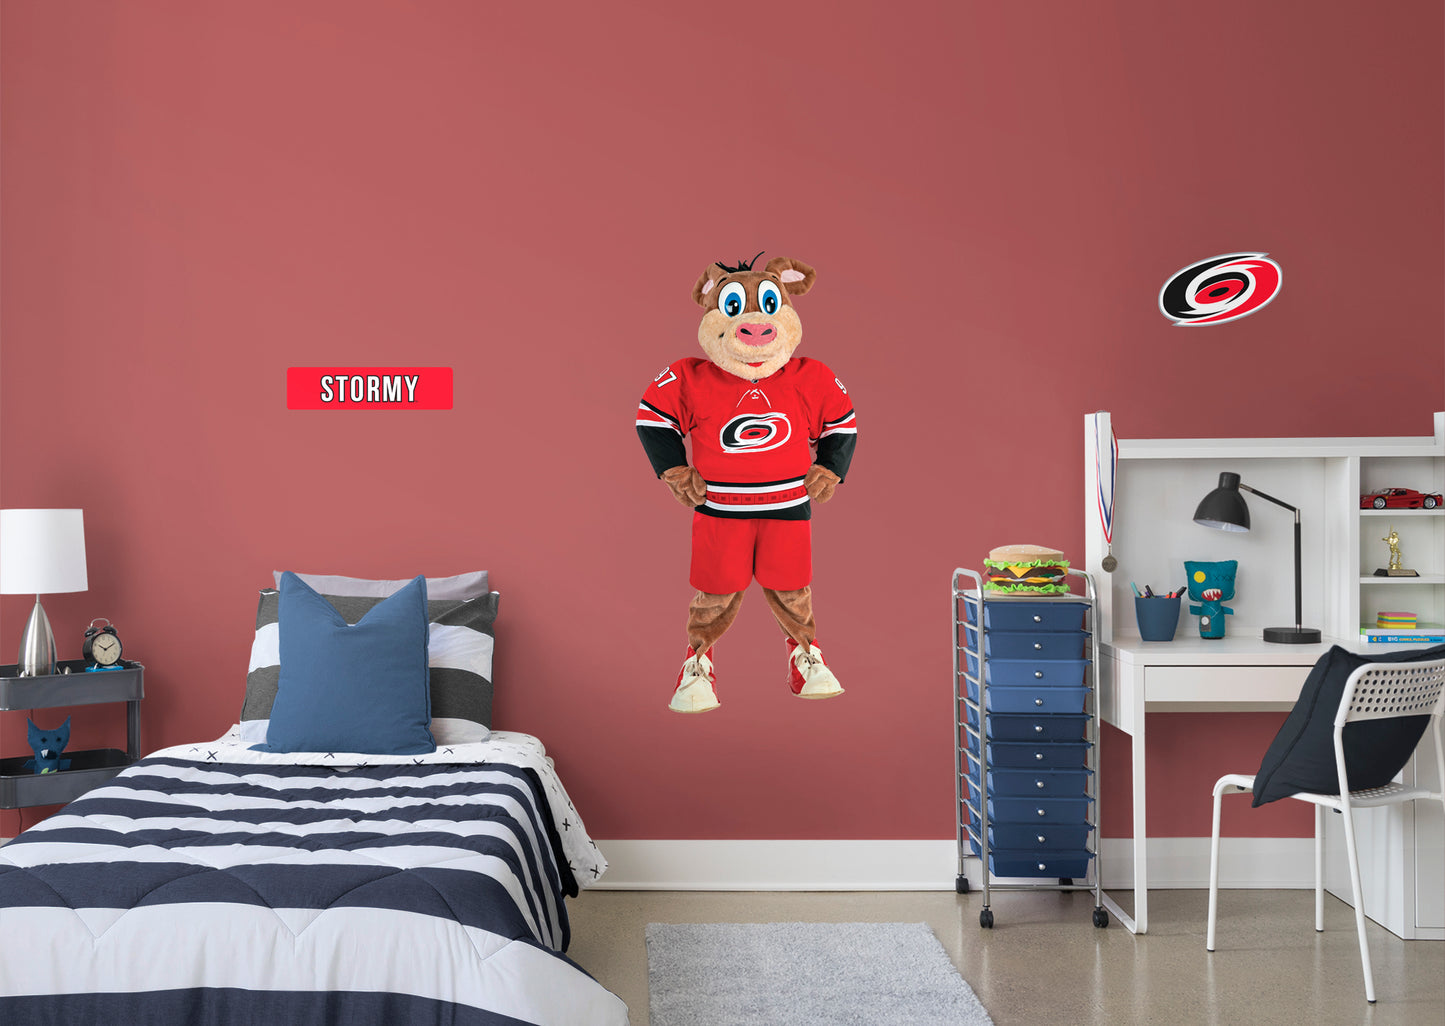 Carolina Hurricanes: Stormy 2021 Mascot        - Officially Licensed NHL Removable Wall   Adhesive Decal